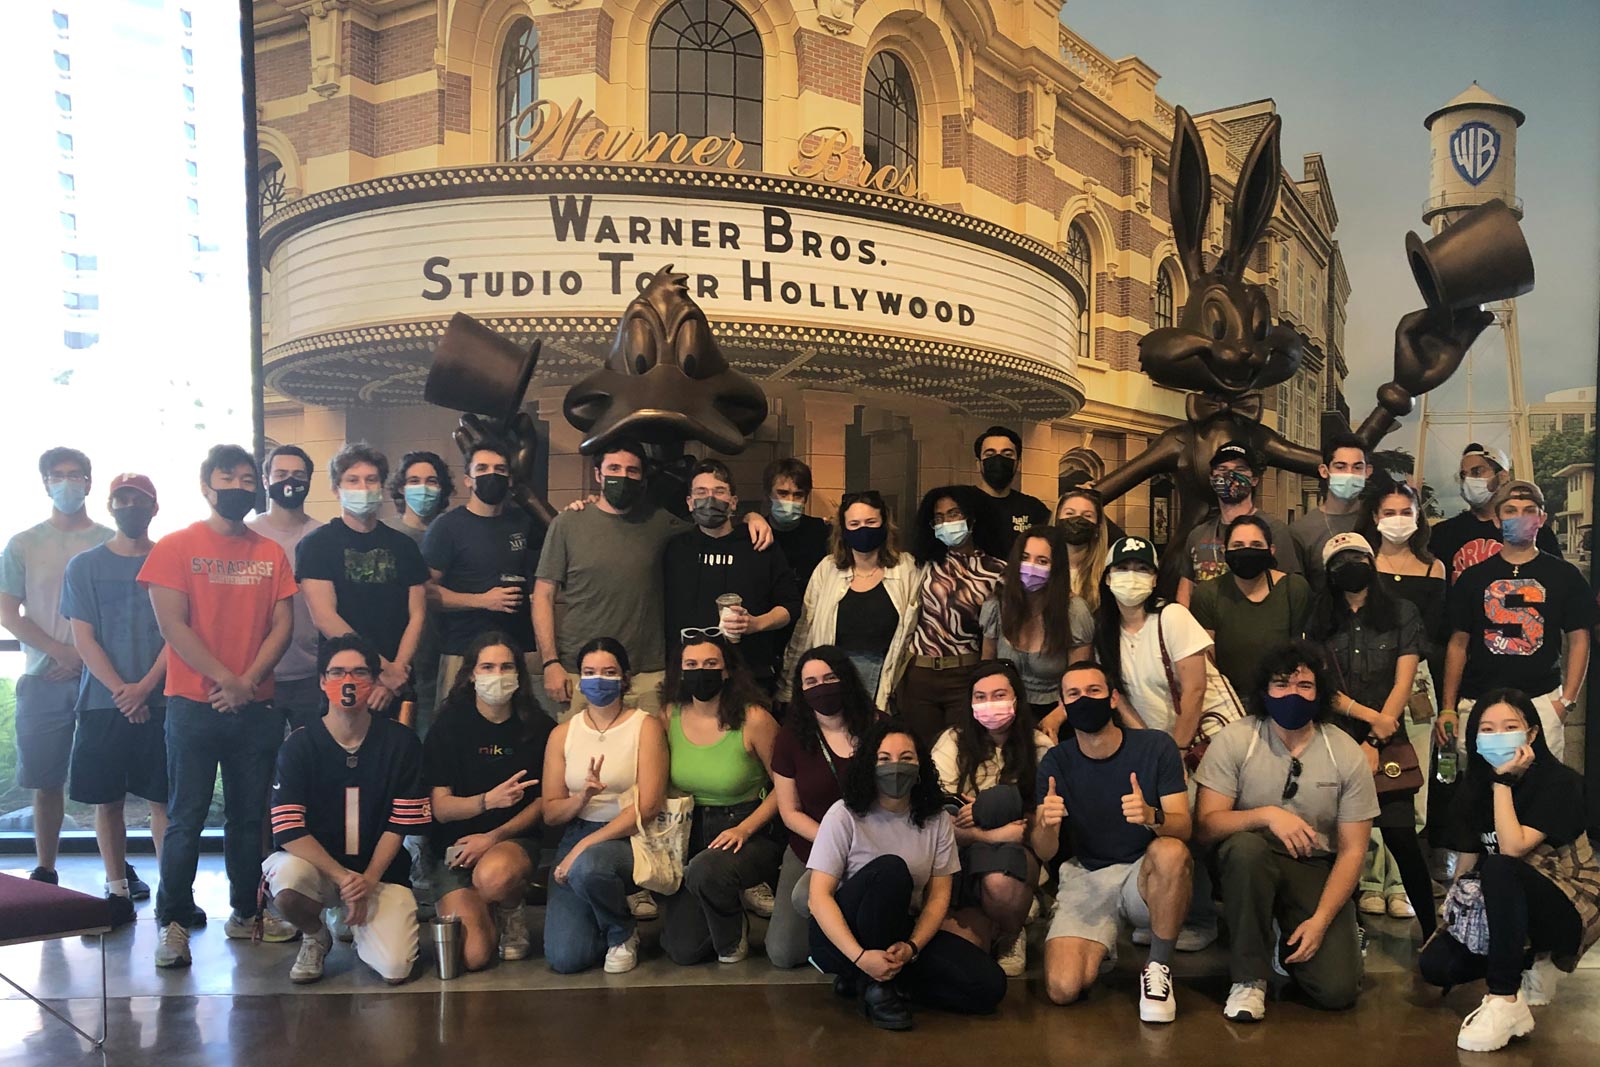 About thirty students gathered for a picture at the Warner Brothers Studio